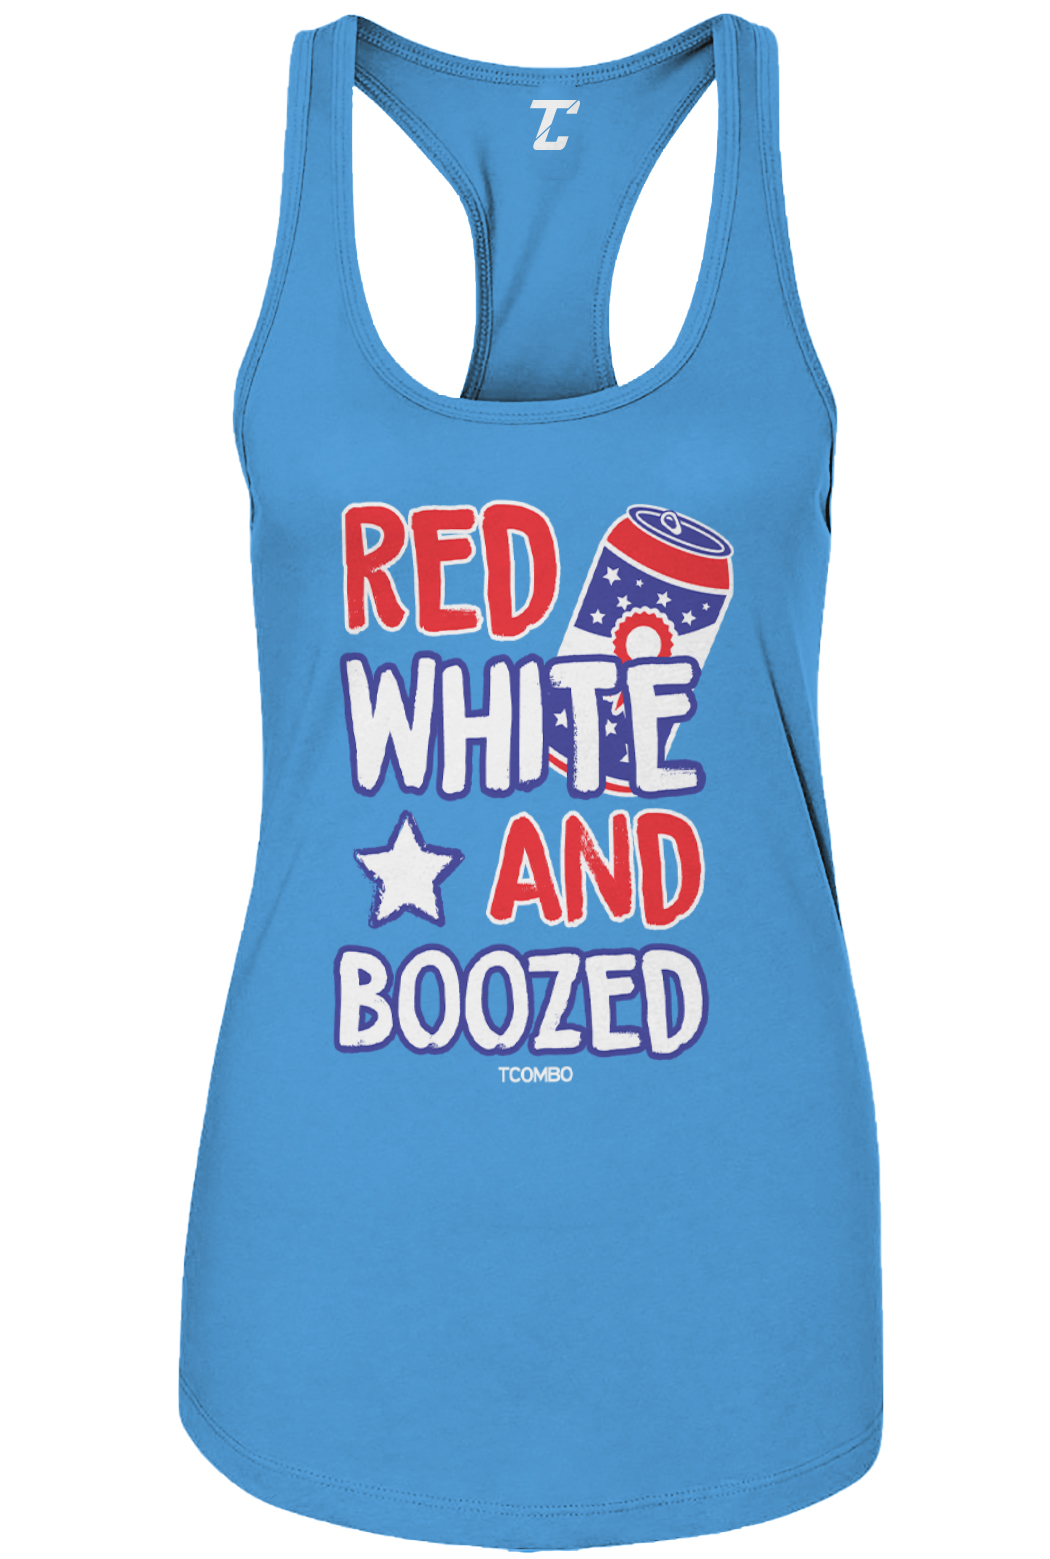 Red Wine & Blue 4th of July Fireworks Patriotic Party Women's Racer Tank